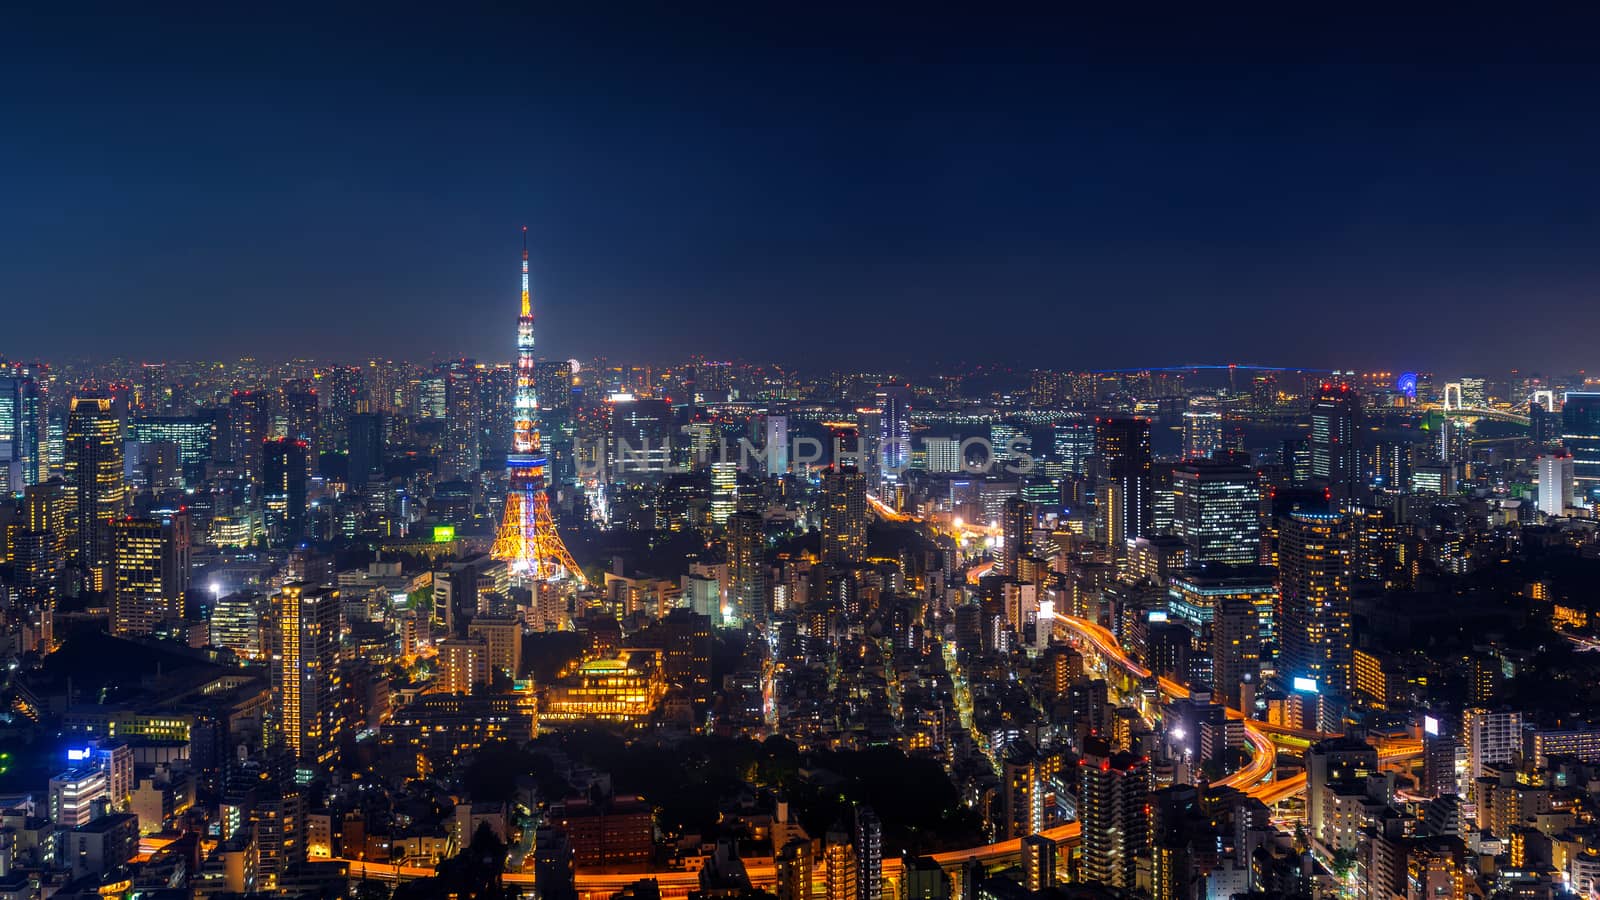 Panorama of Tokyo cityscape at night, Japan. by gutarphotoghaphy